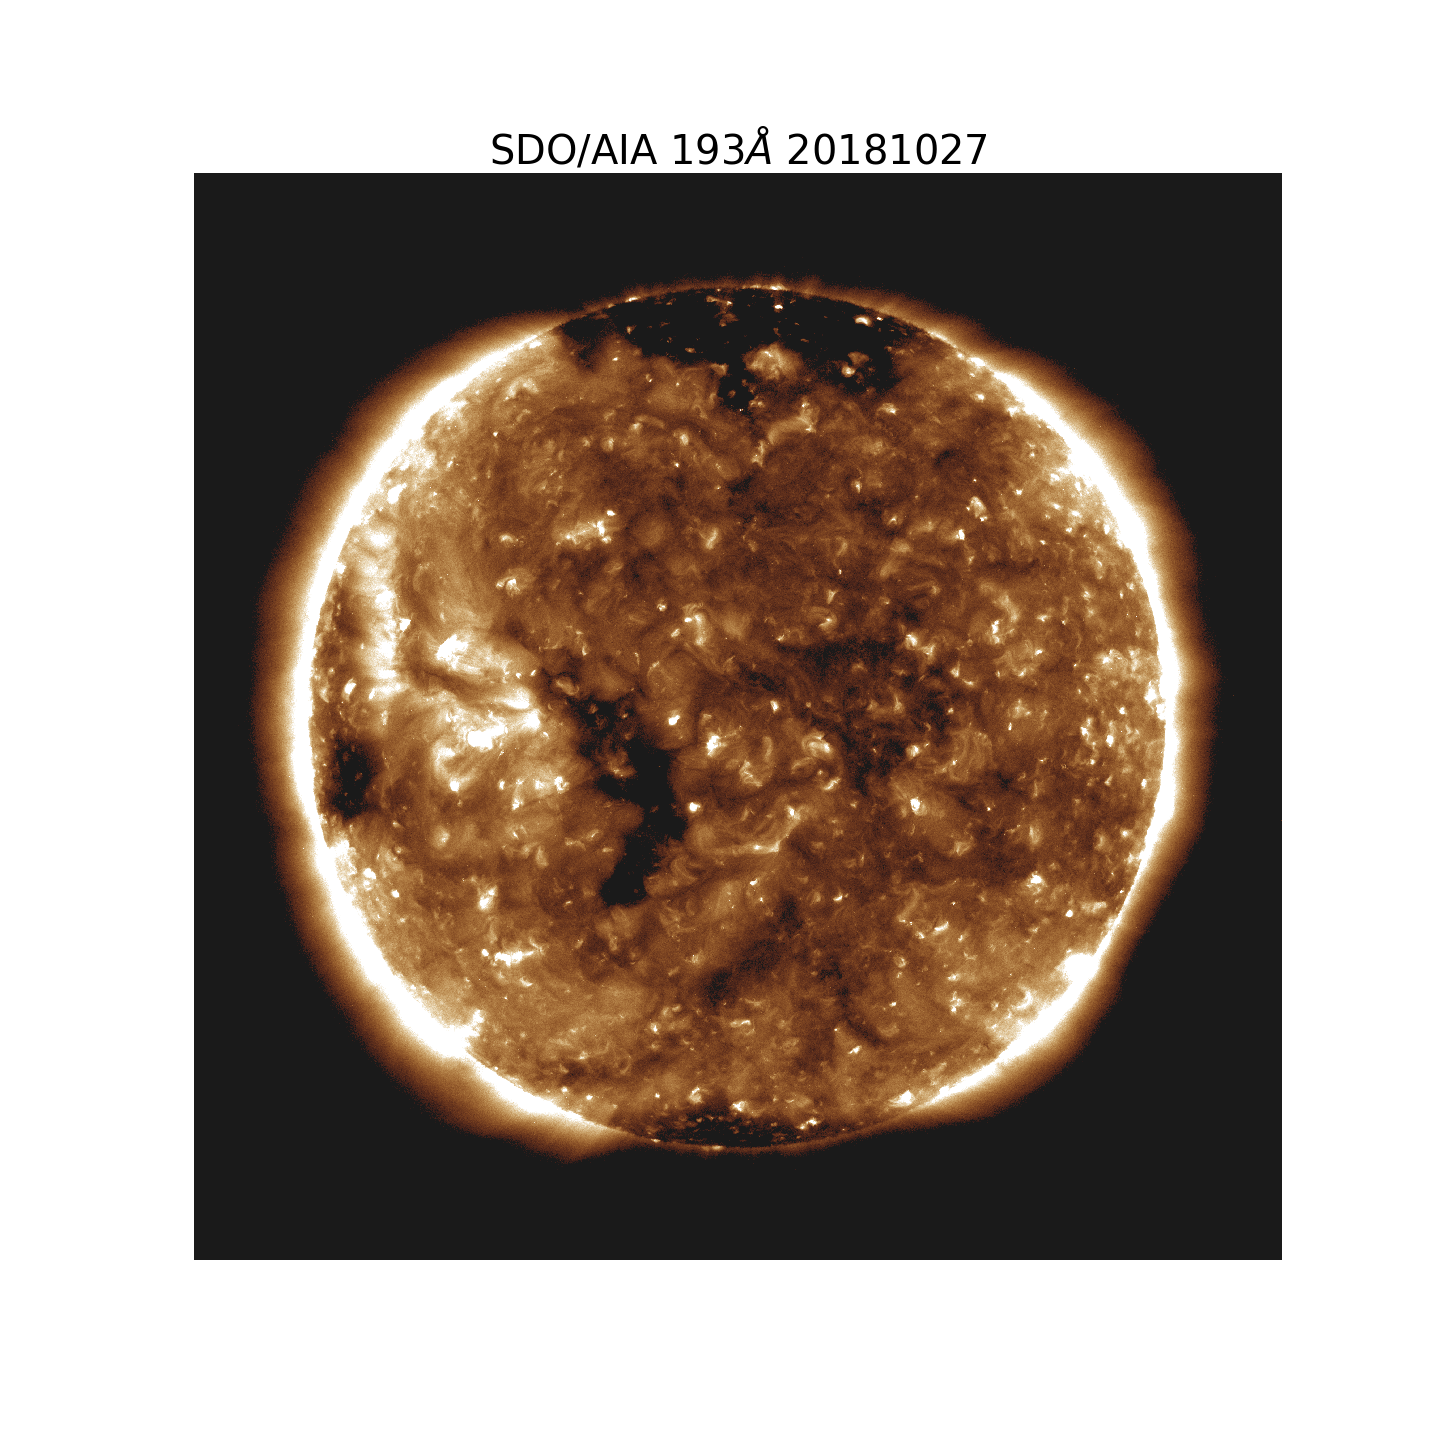 NASA's Parker Solar Probe observed a slow solar wind flowing out from the small coronal hole